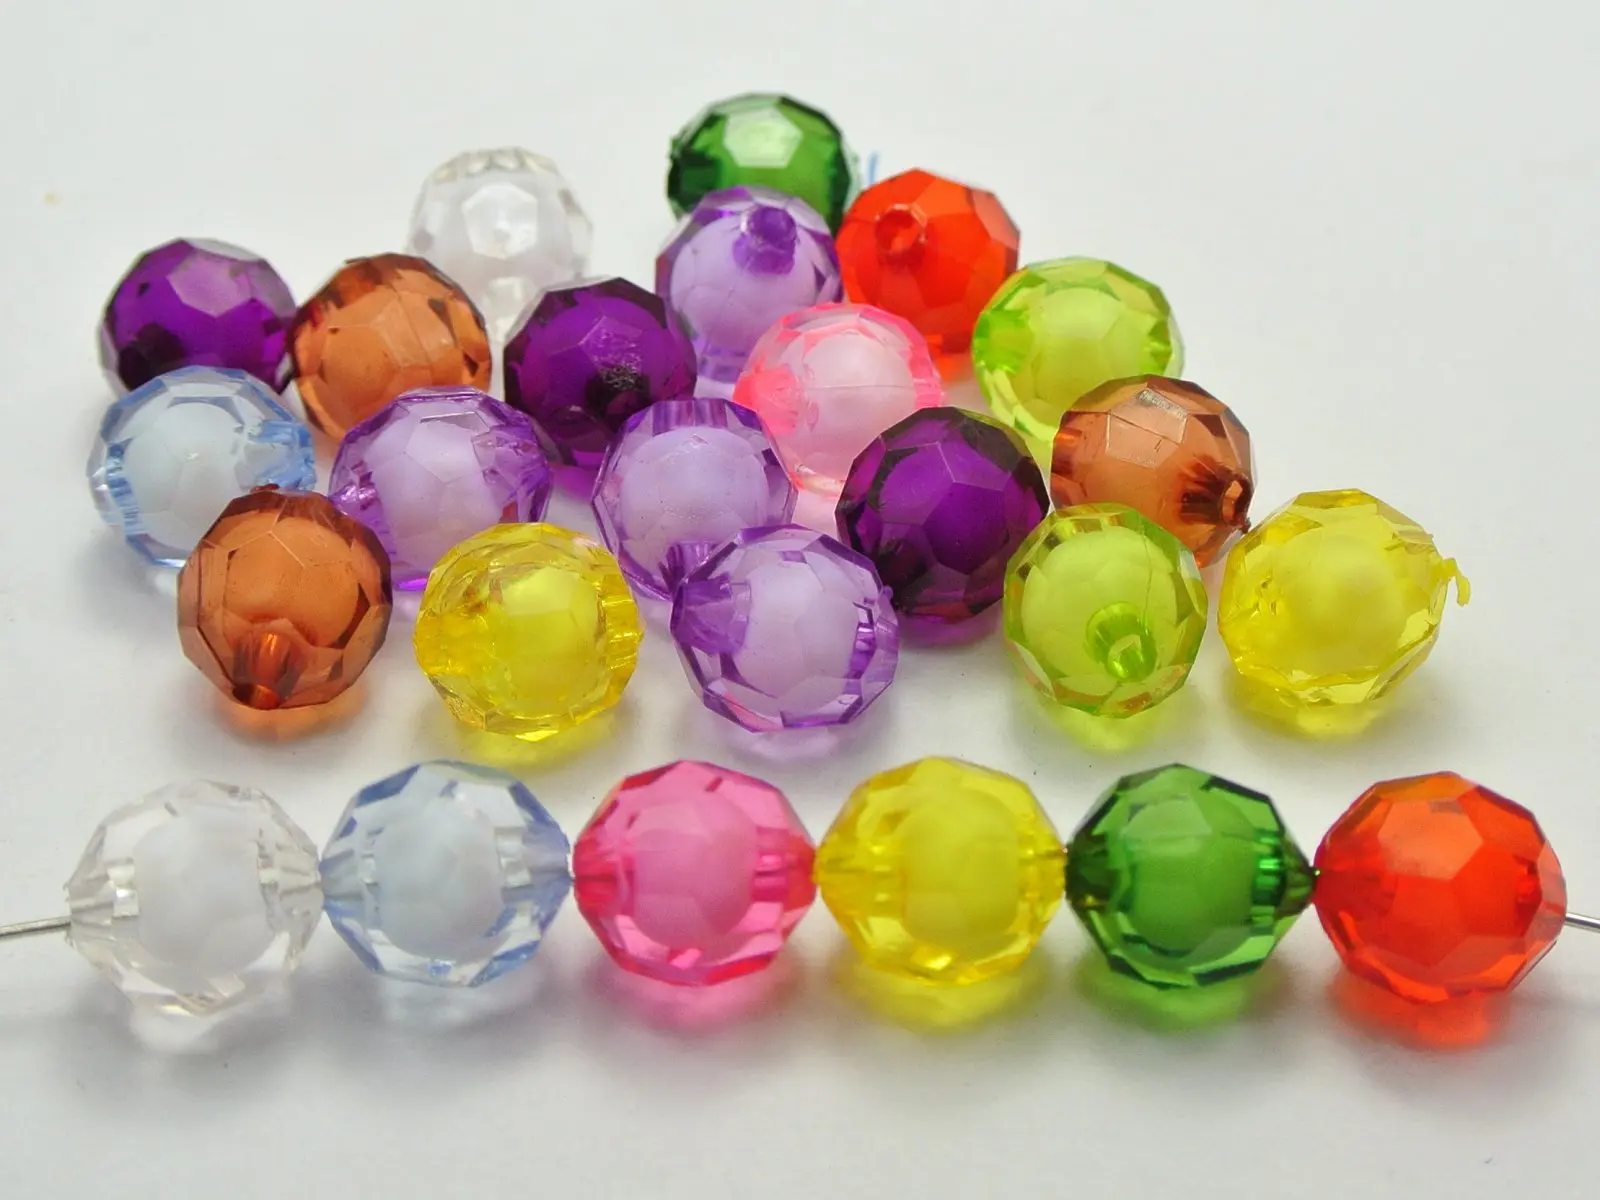 

100 Mixed Color Acrylic Faceted Round Beads 12mm "Bead in Bead"